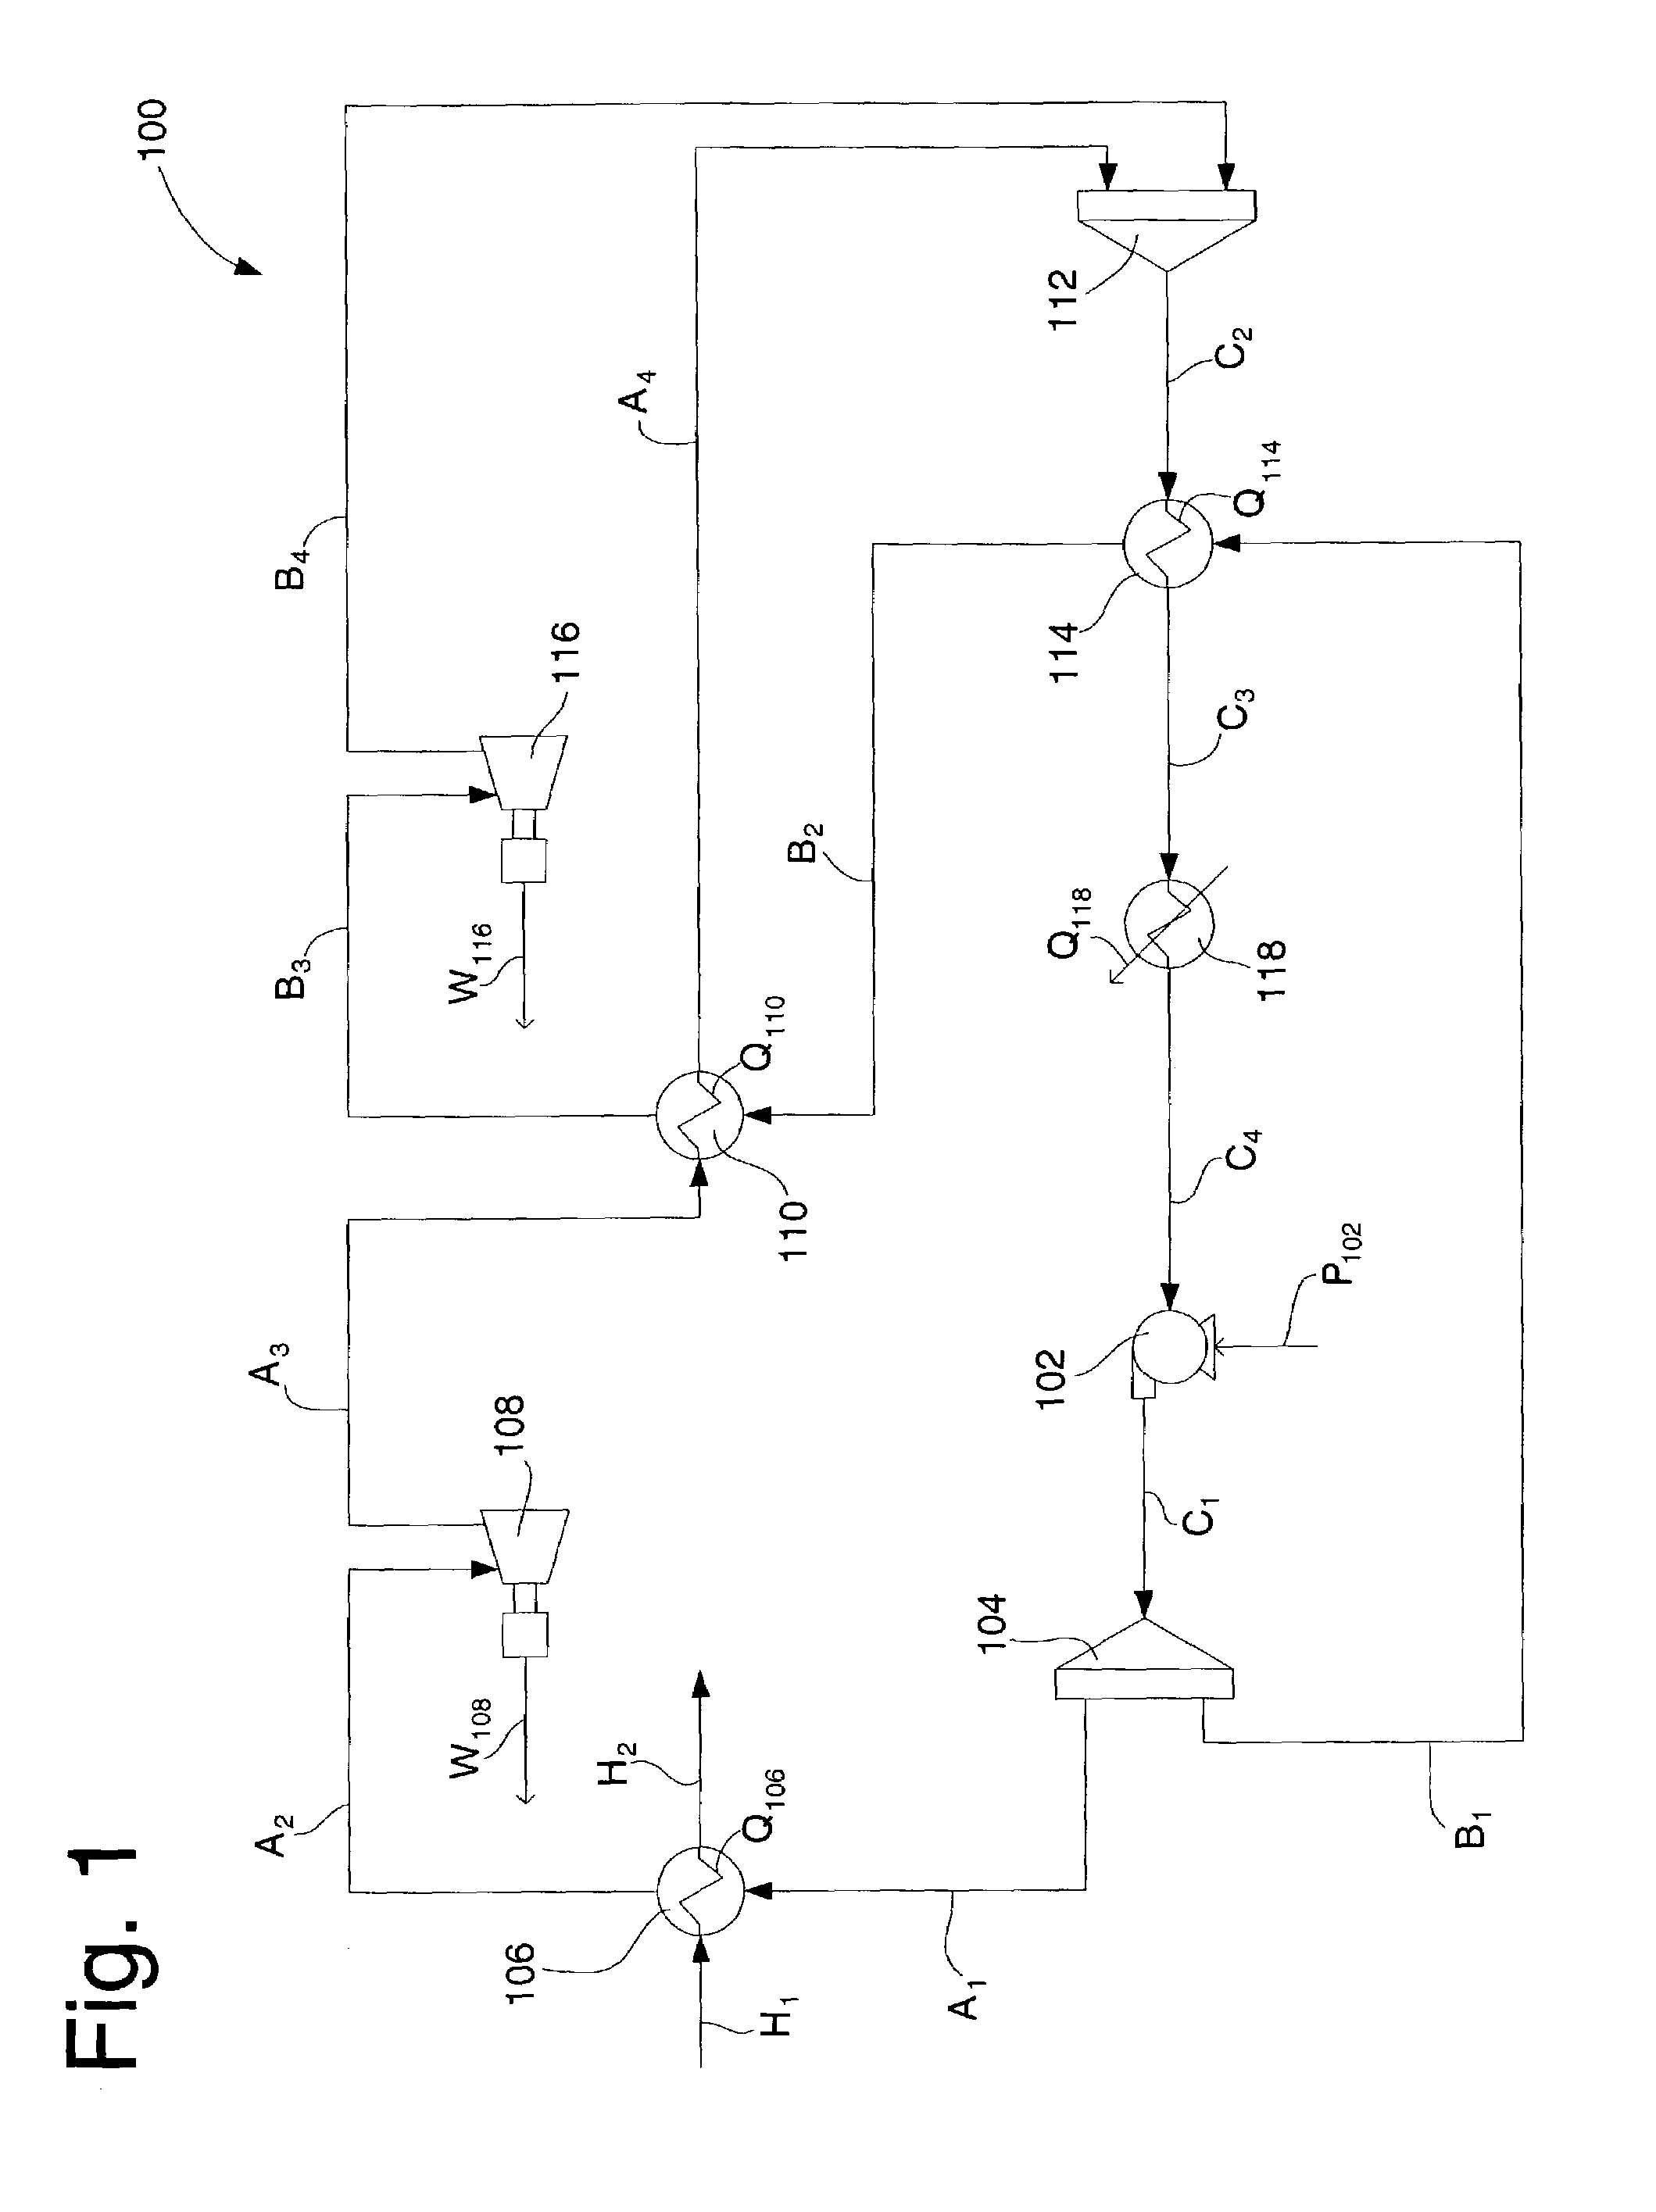 Cascading closed loop cycle power generation